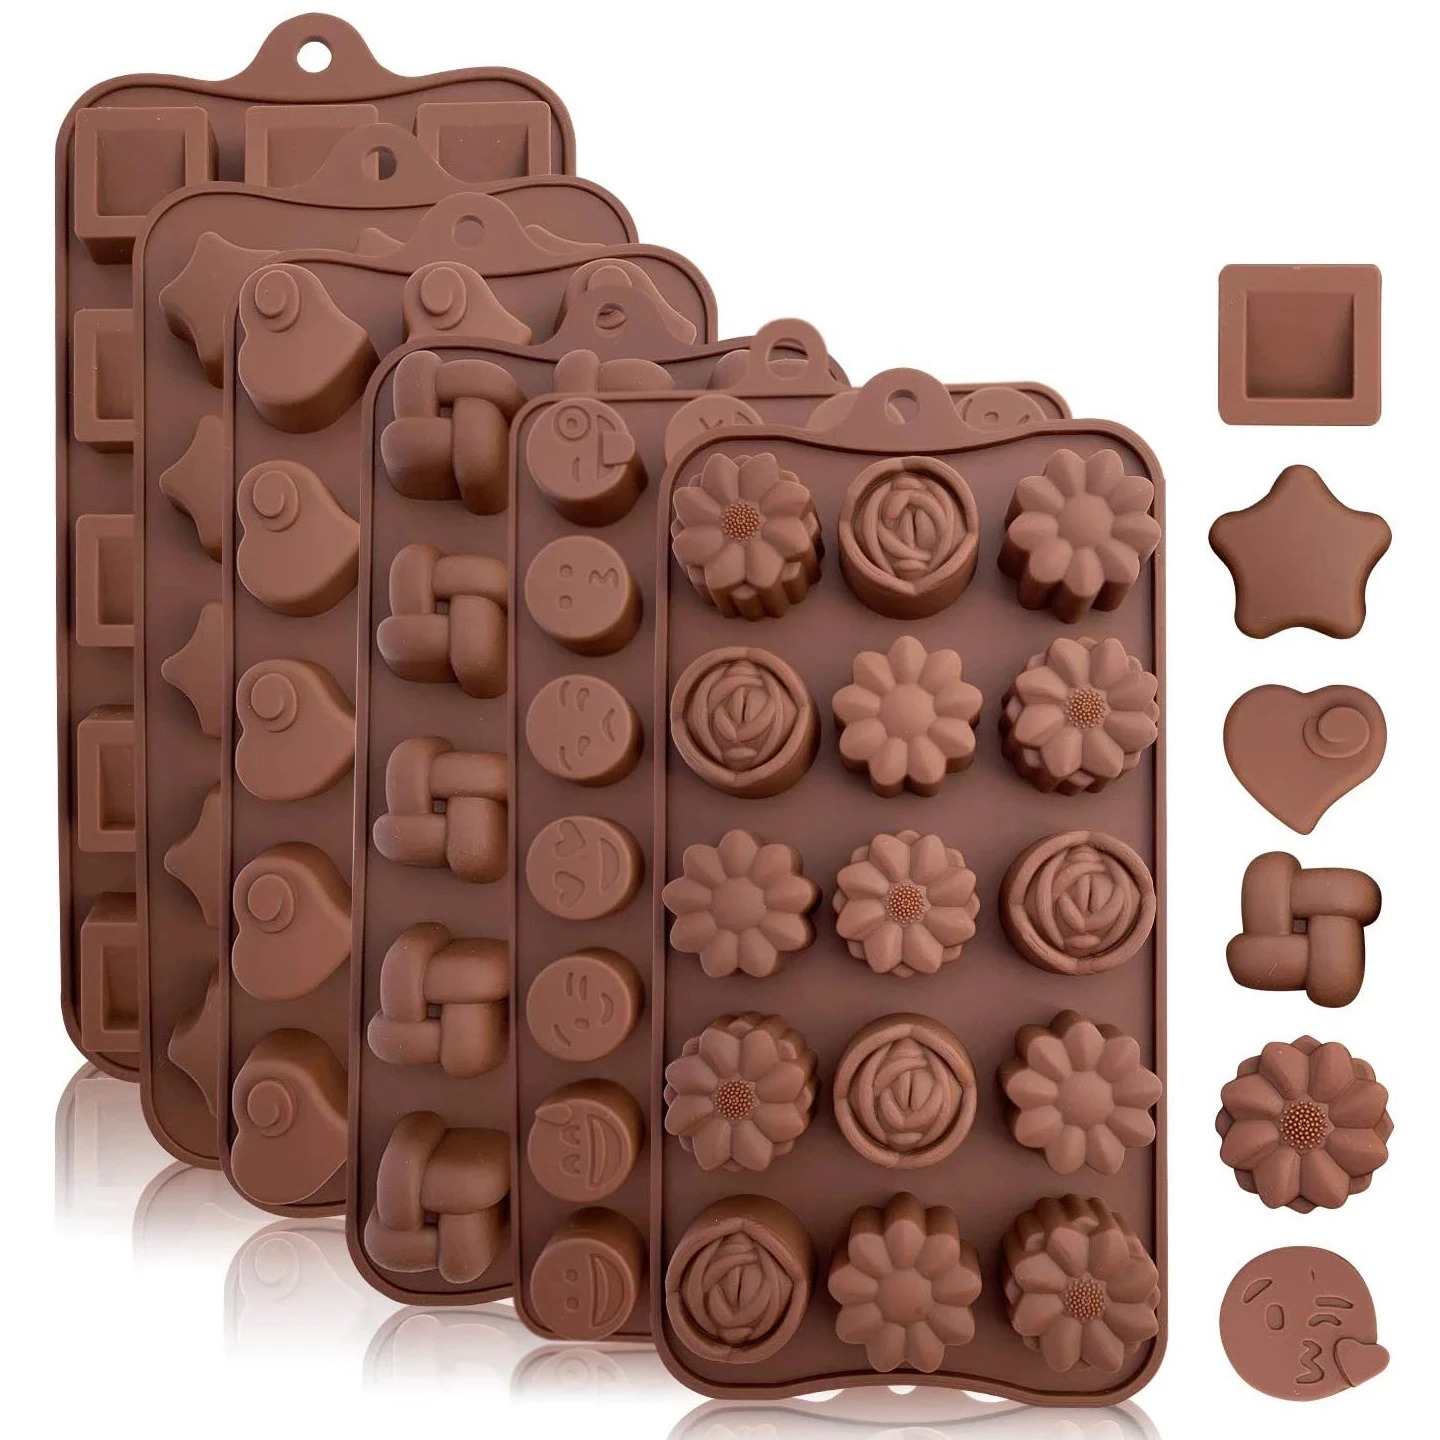 Christmas Multi Design Chocolate Cake Ice Mould Tray-Silicon Food Grade Bakeware